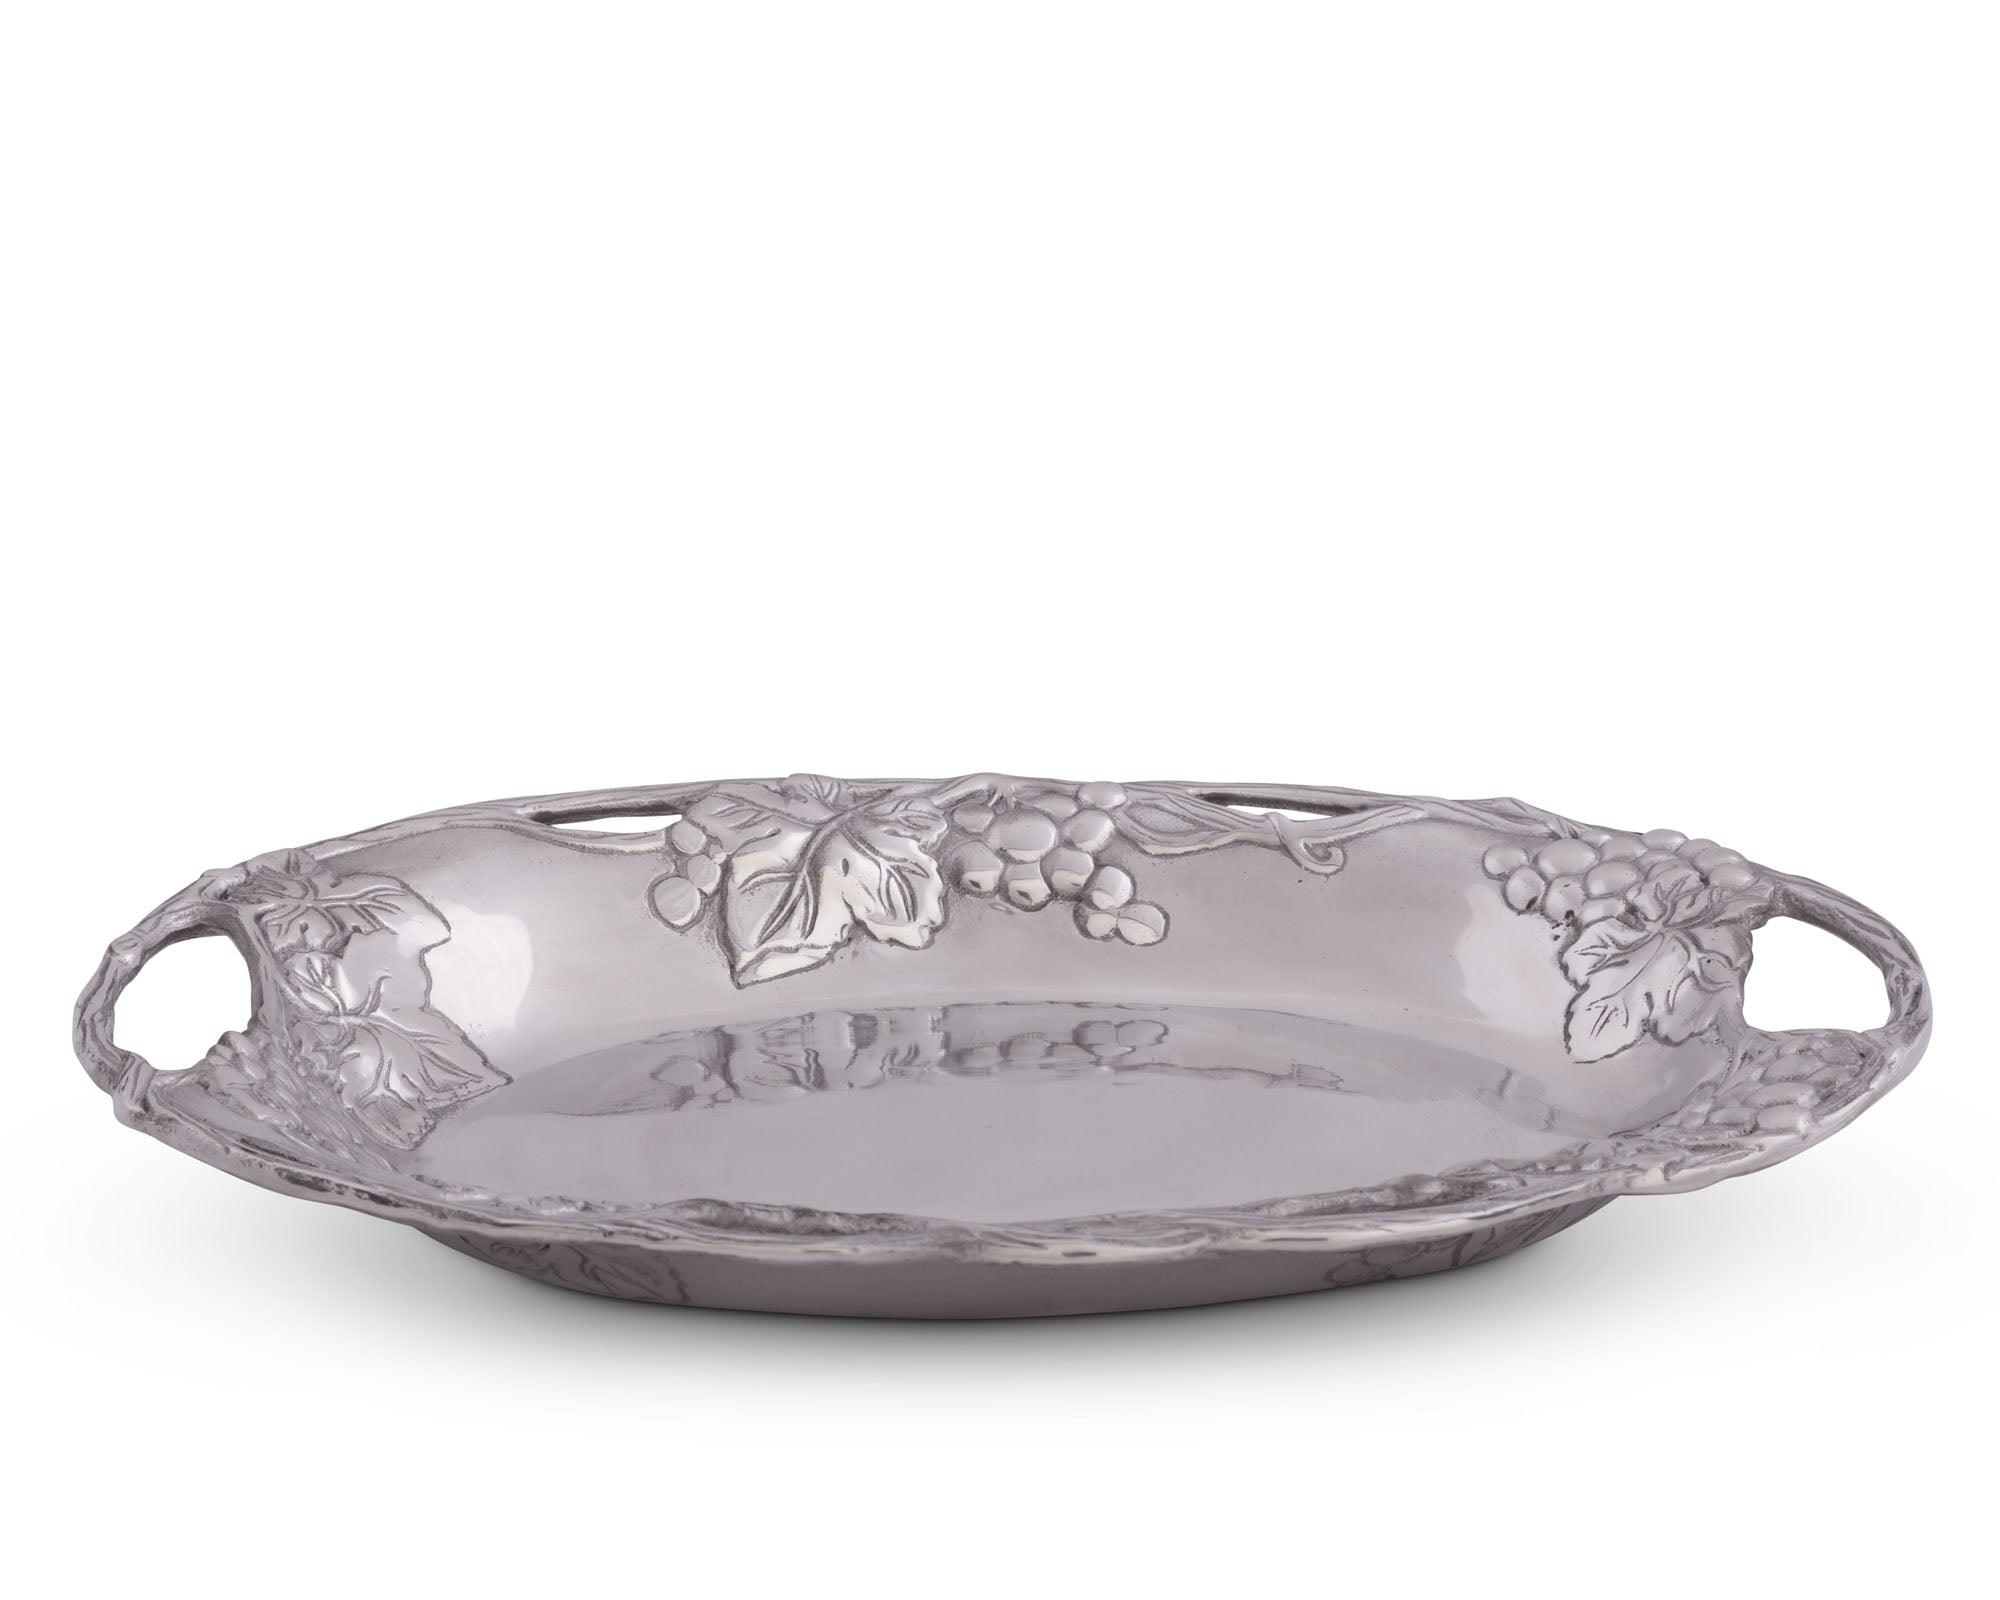 Arthur Court Grape Oval Tray Product Image